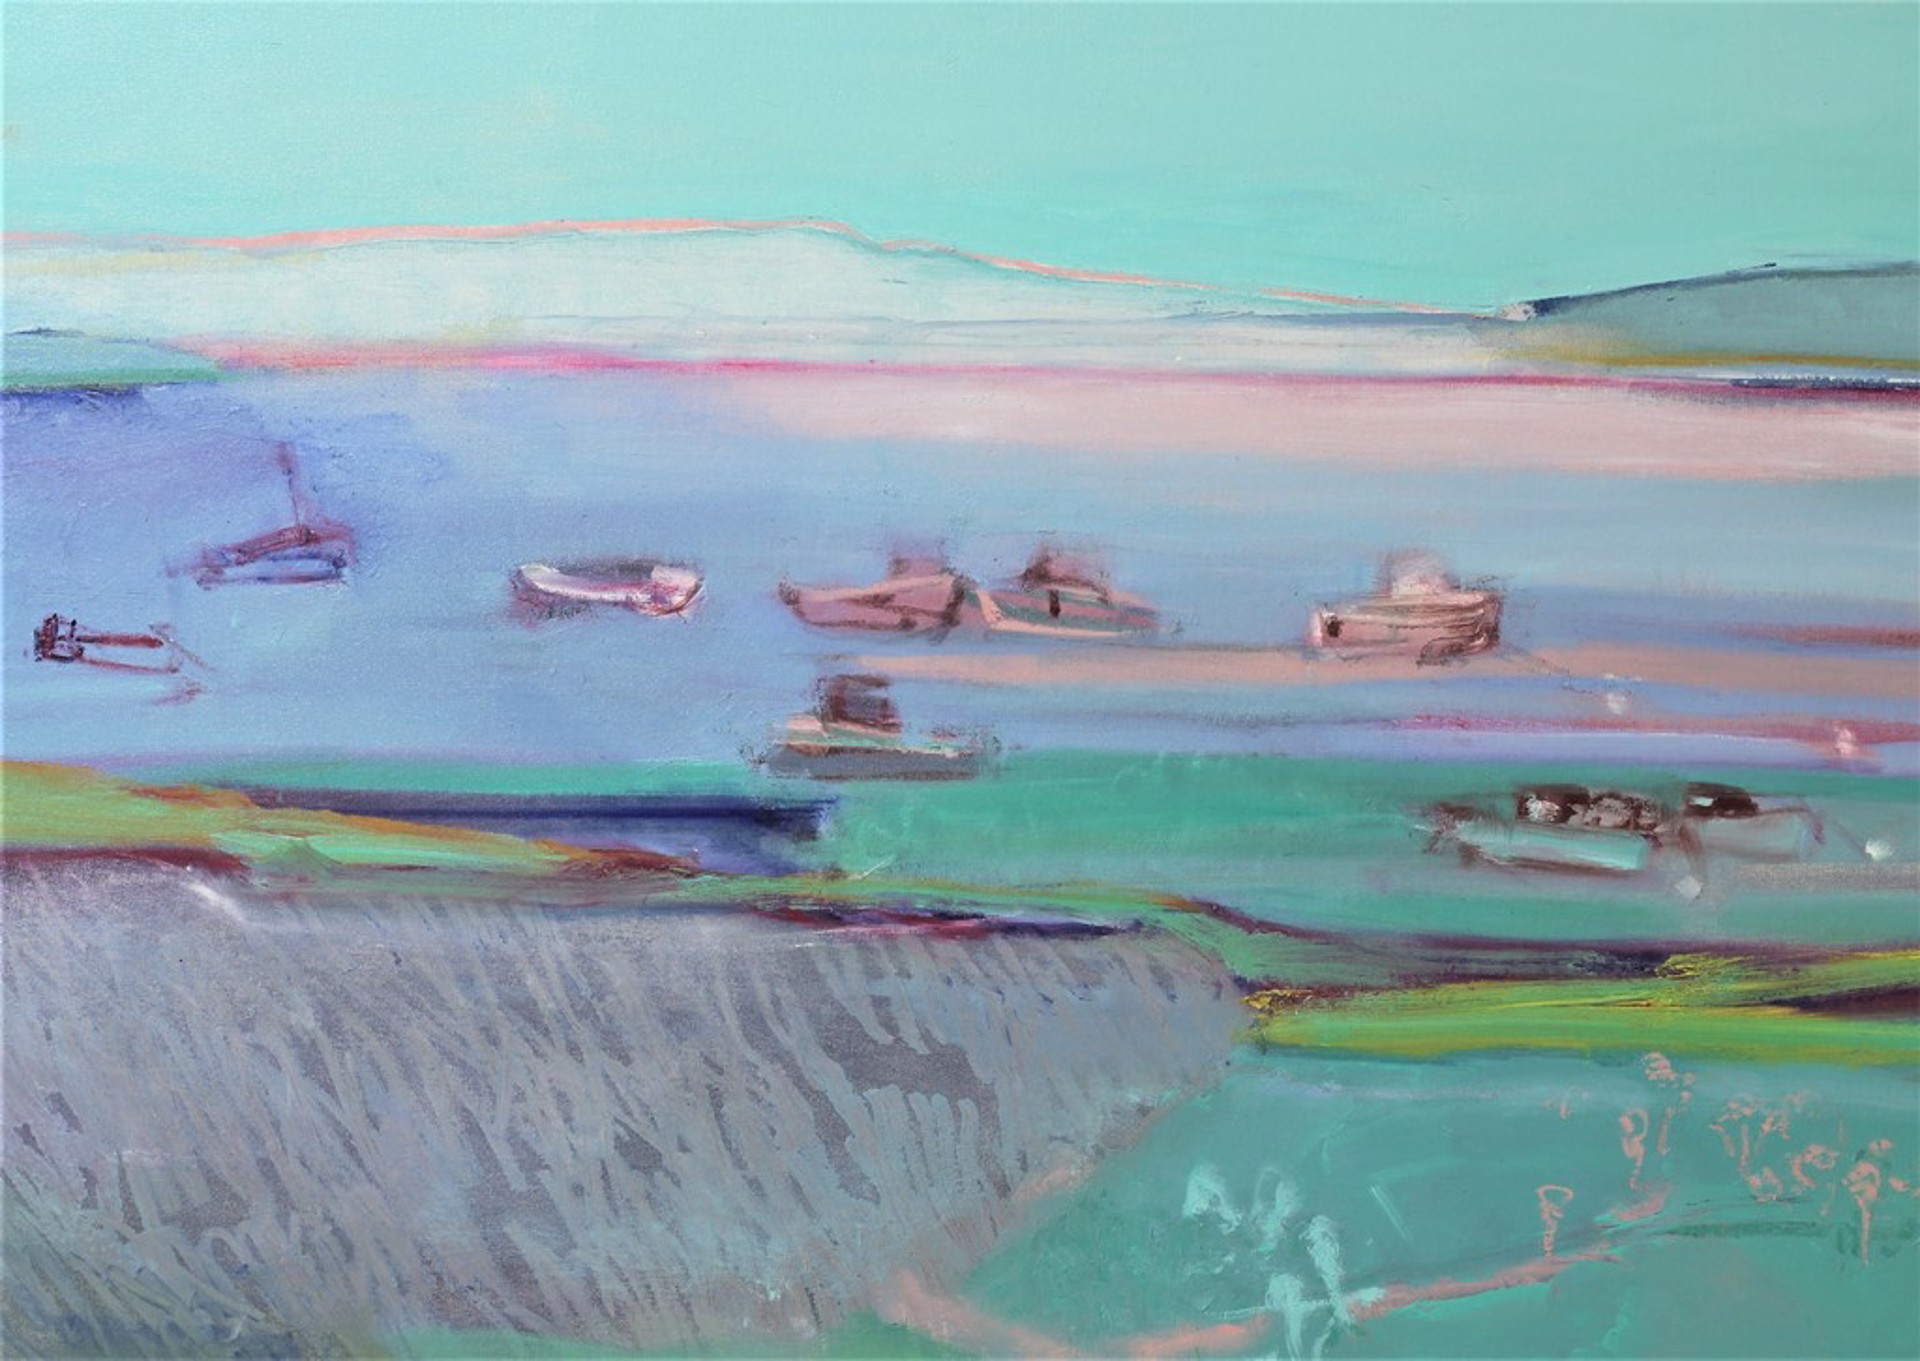 LOW TIDE IN THE BAY by CHRISTINA THWAITES (Landscape)